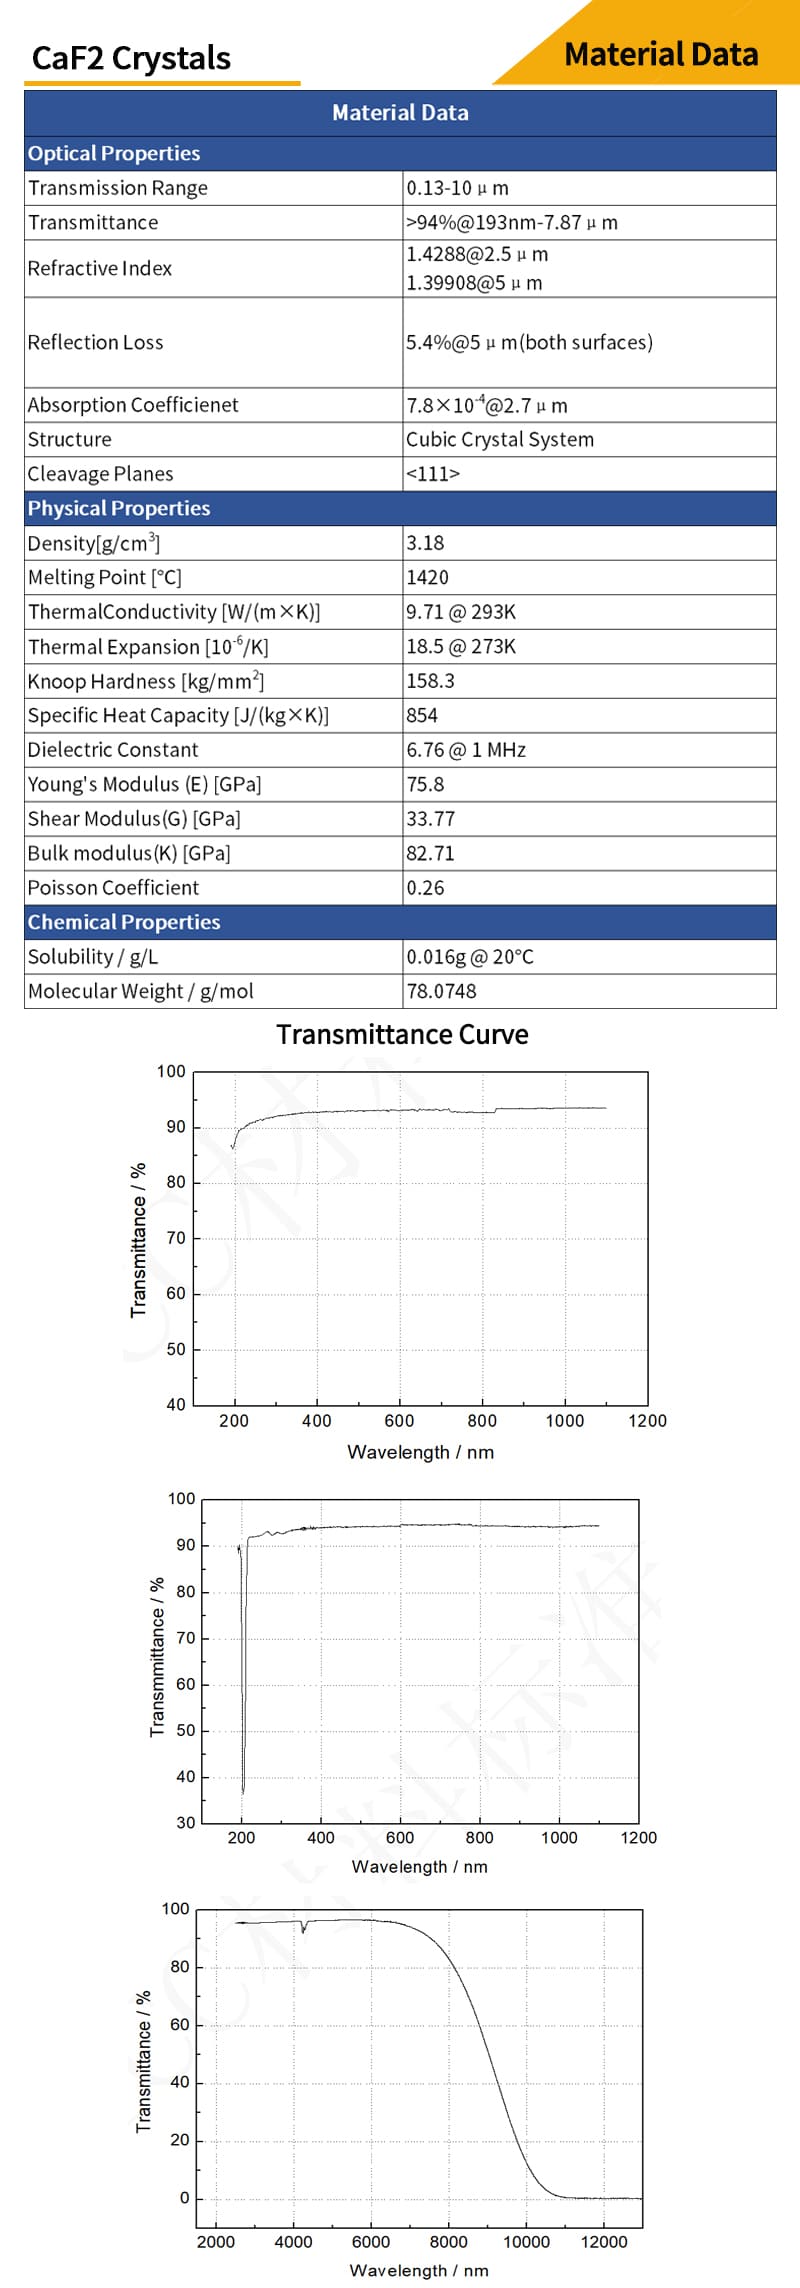 Calcium fluoride wedge  window material data and transmittance curves